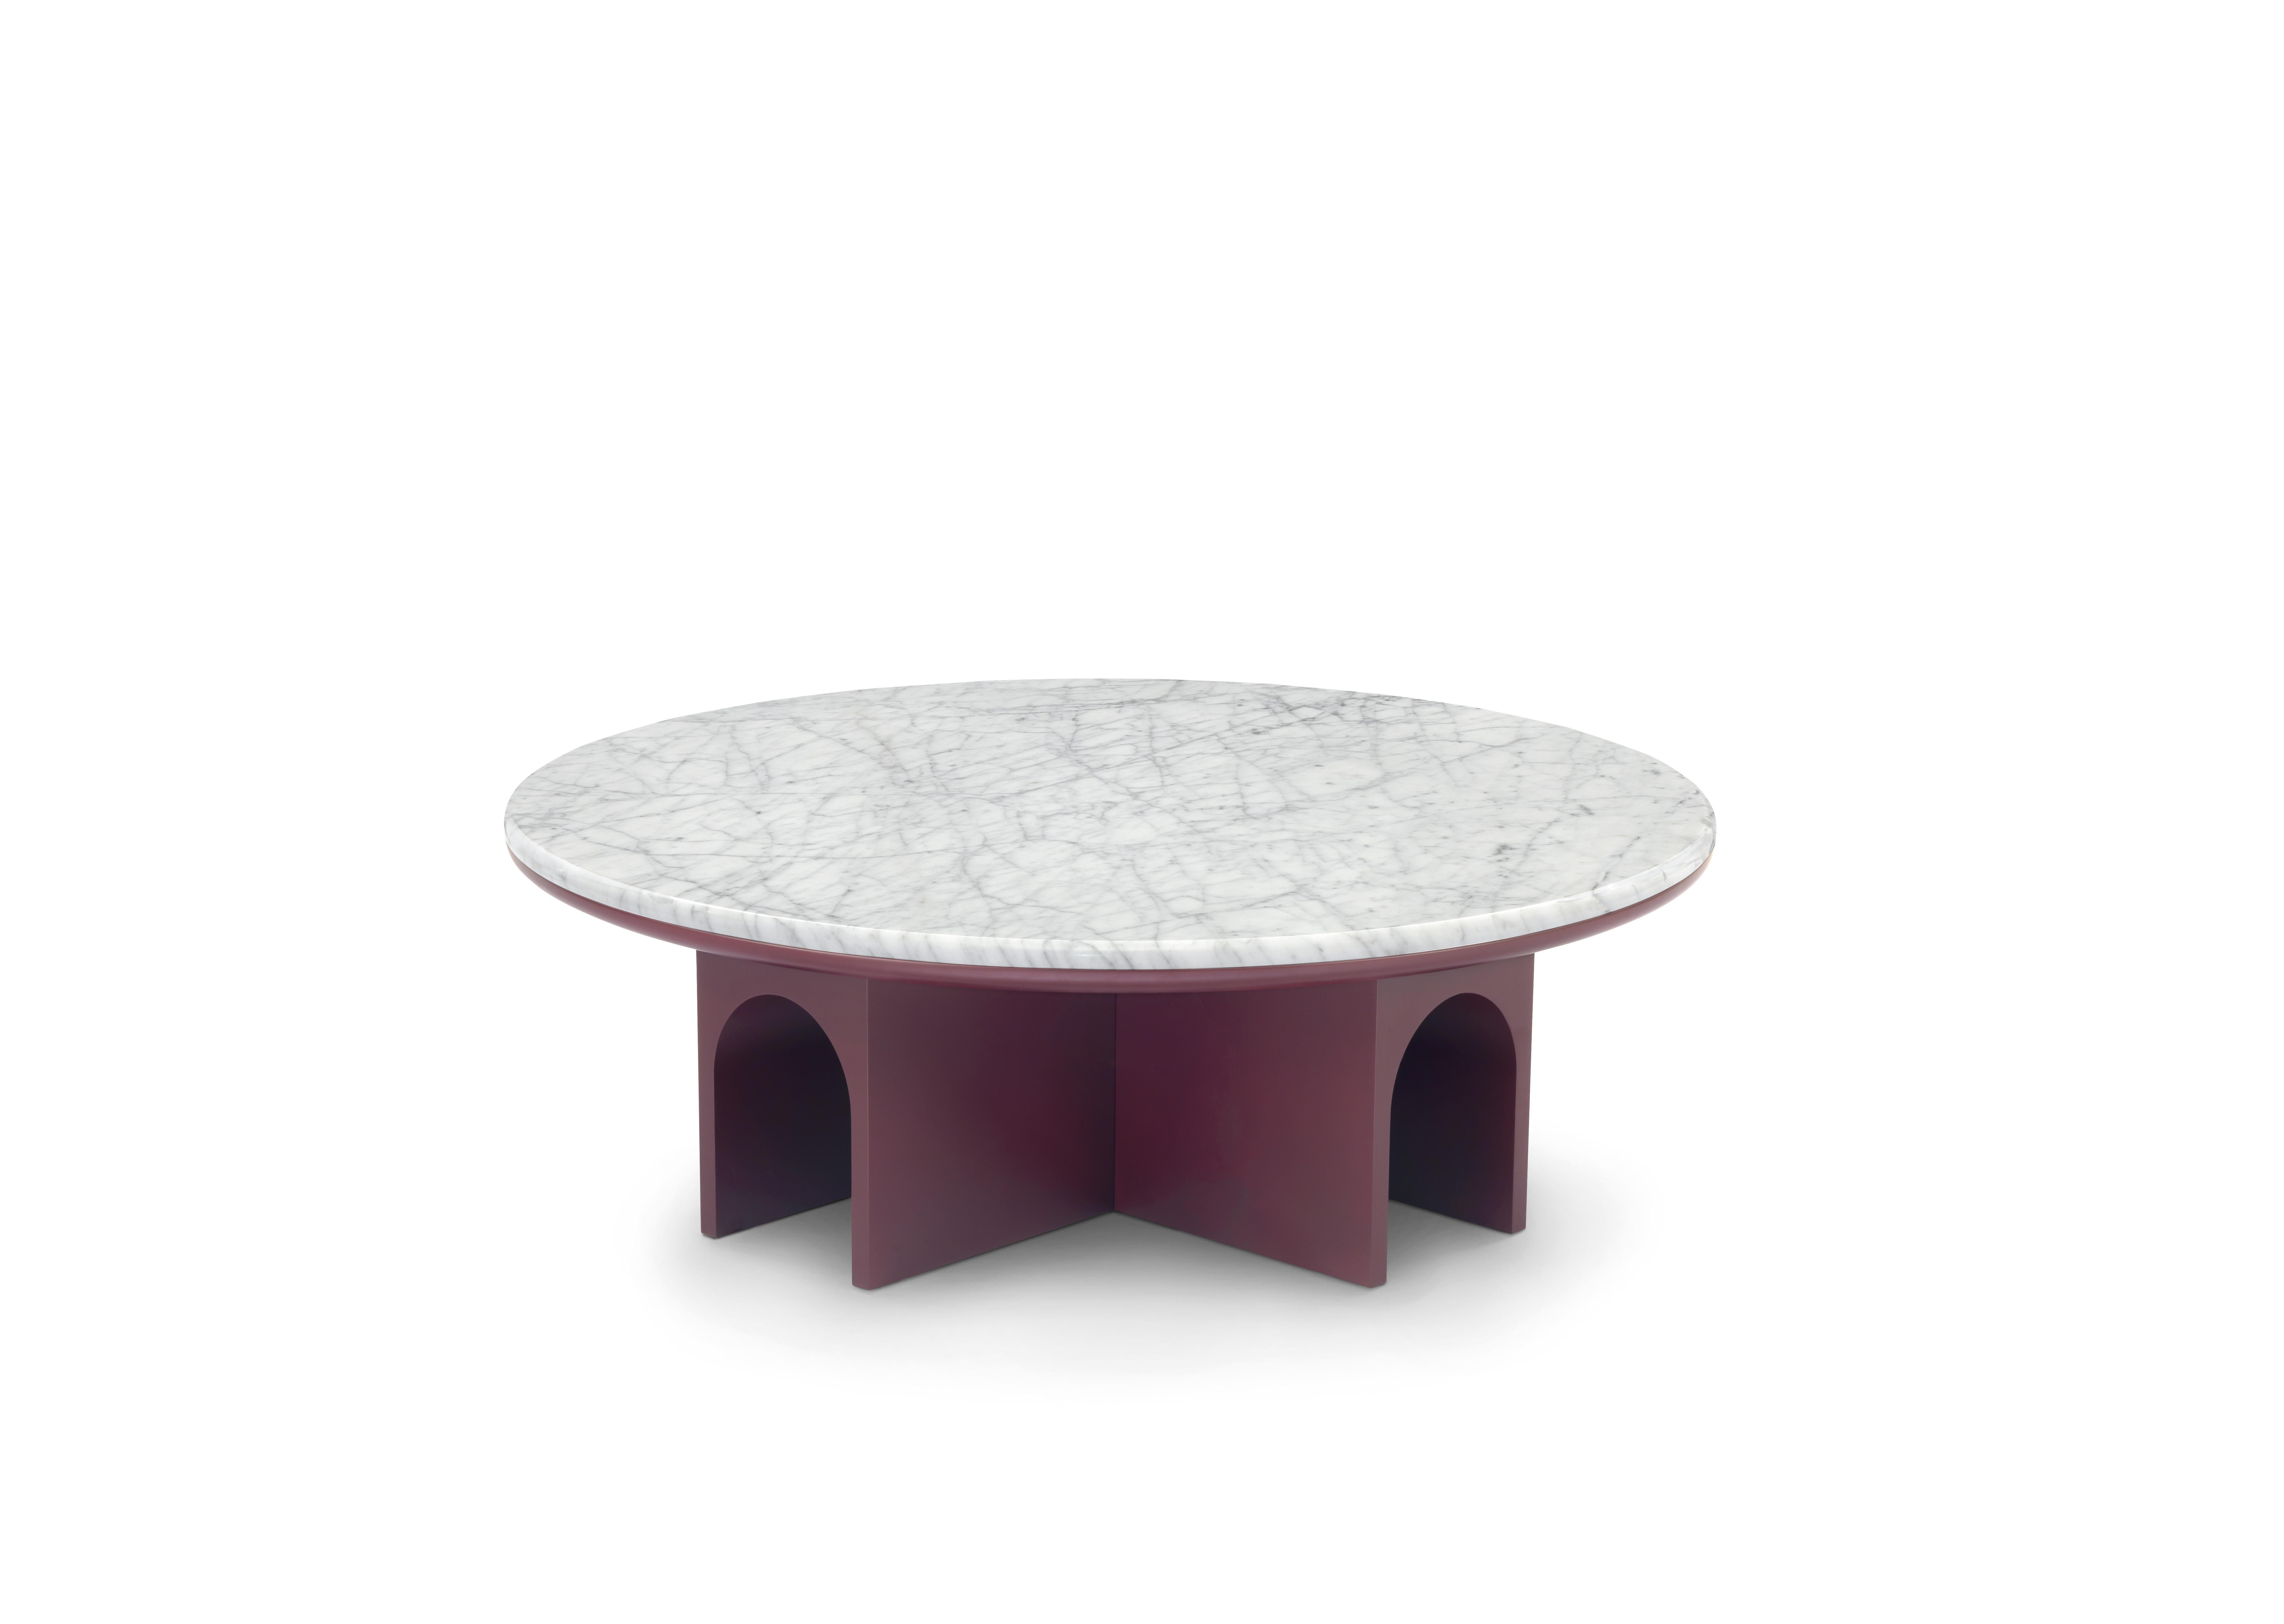 Arflex Arcolor 100 Small Table in White Carrara Marble Top by Jaime Hayon. Small tables designed around the classical geometry of the arch, employing from the beginning the disciplined use of the arch to create something more organic.

Additional